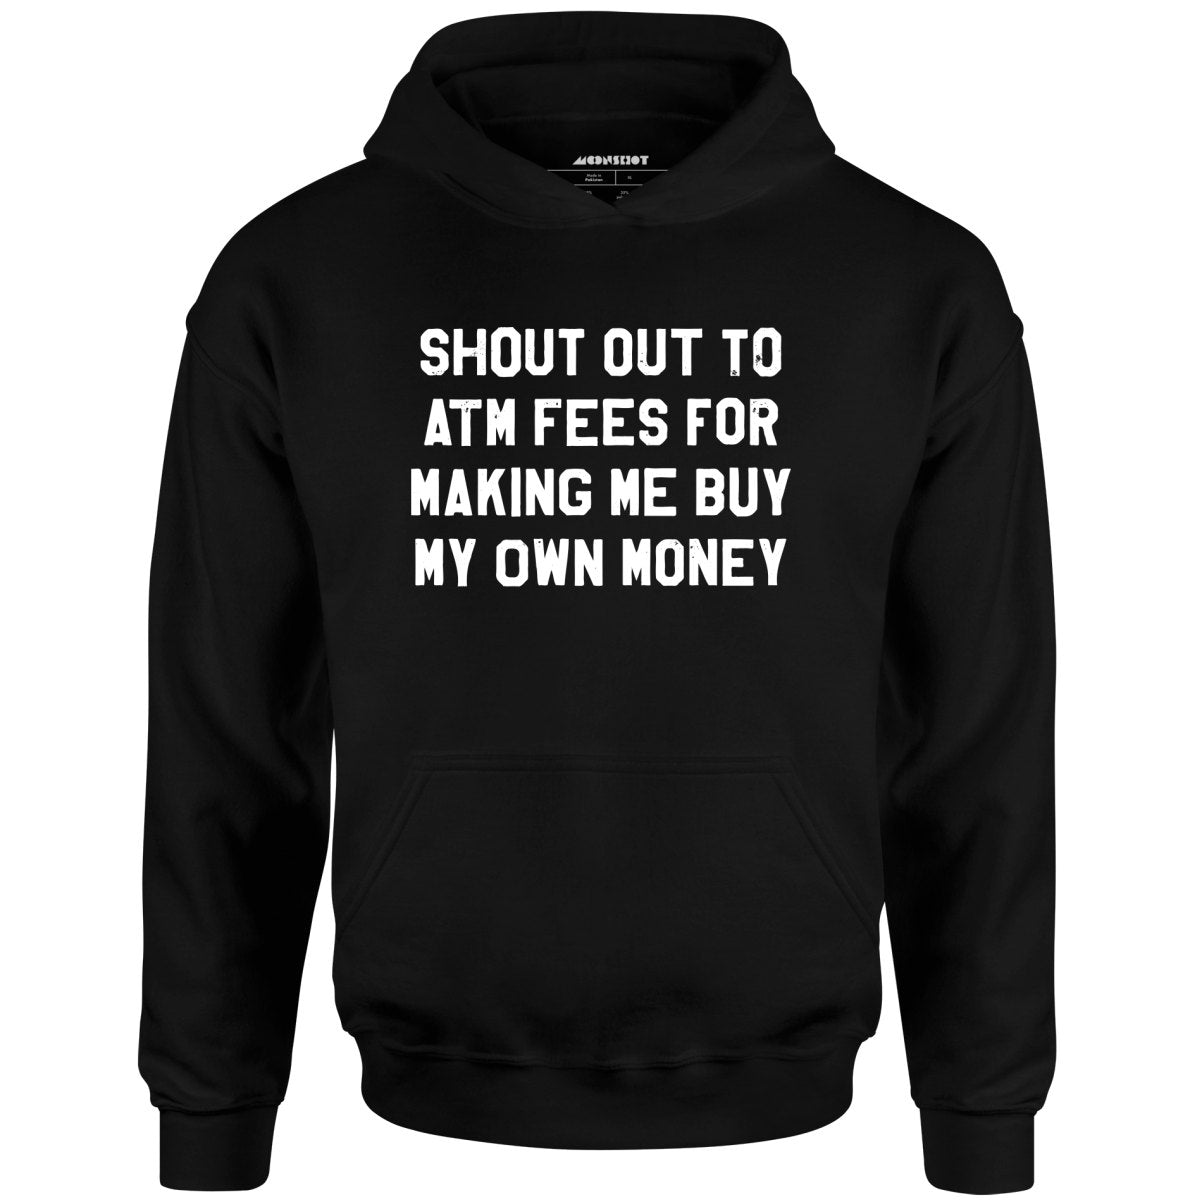 Shout Out to ATM Fees for Making Me Buy My Own Money - Unisex Hoodie